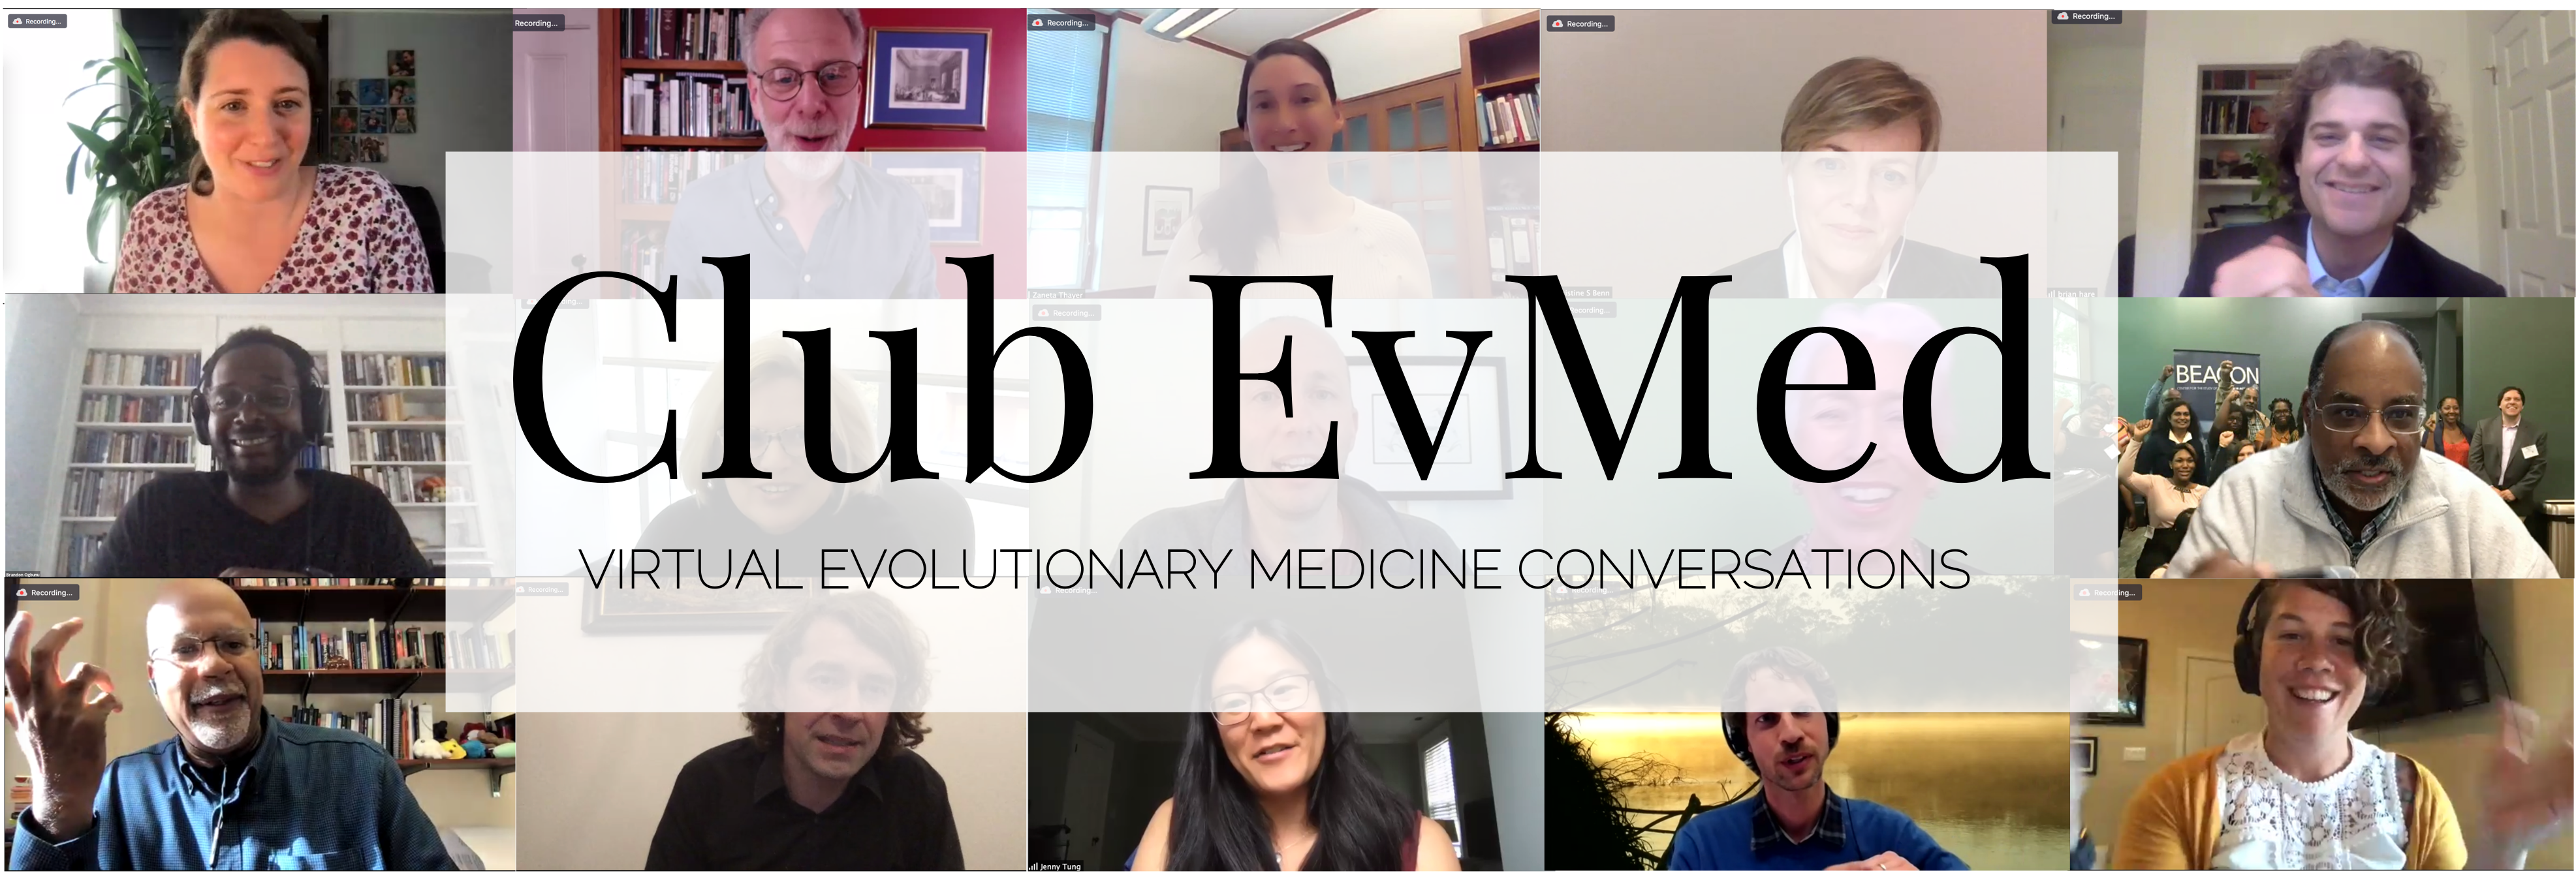 collage of people in Zoom meetings with Club EvMed logo overlaid